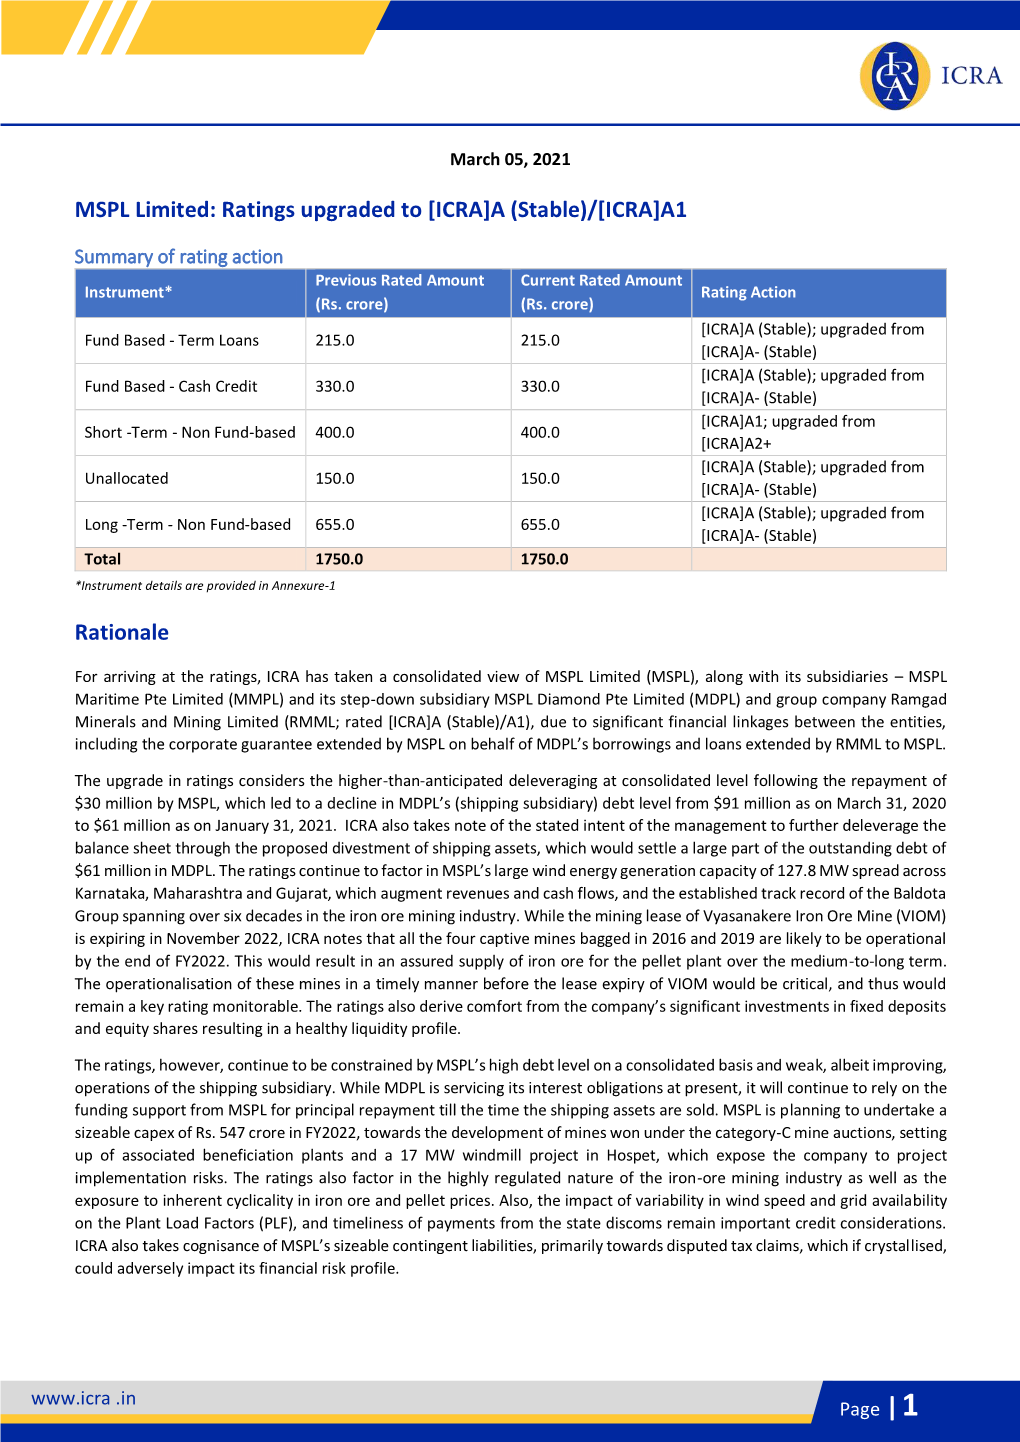 MSPL Limited: Ratings Upgraded to [ICRA]A (Stable)/[ICRA]A1 Rationale